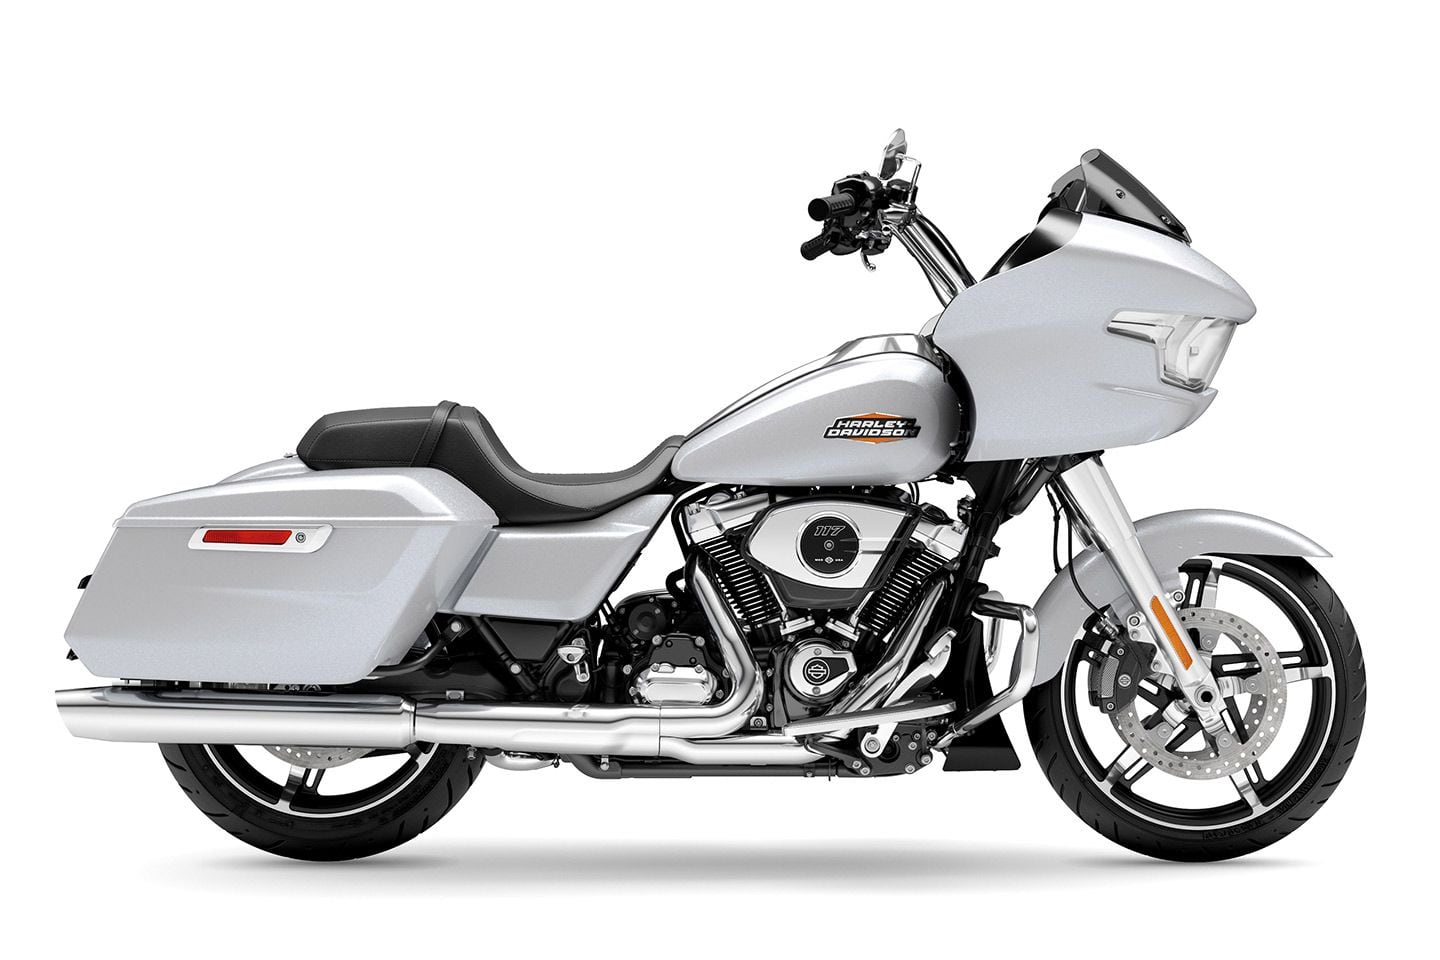 Both the Road Glide and the Street Glide can be ordered in Chrome or Black trim options. Base MSRP for both bikes is $25,999, but black trim adds $1,350.